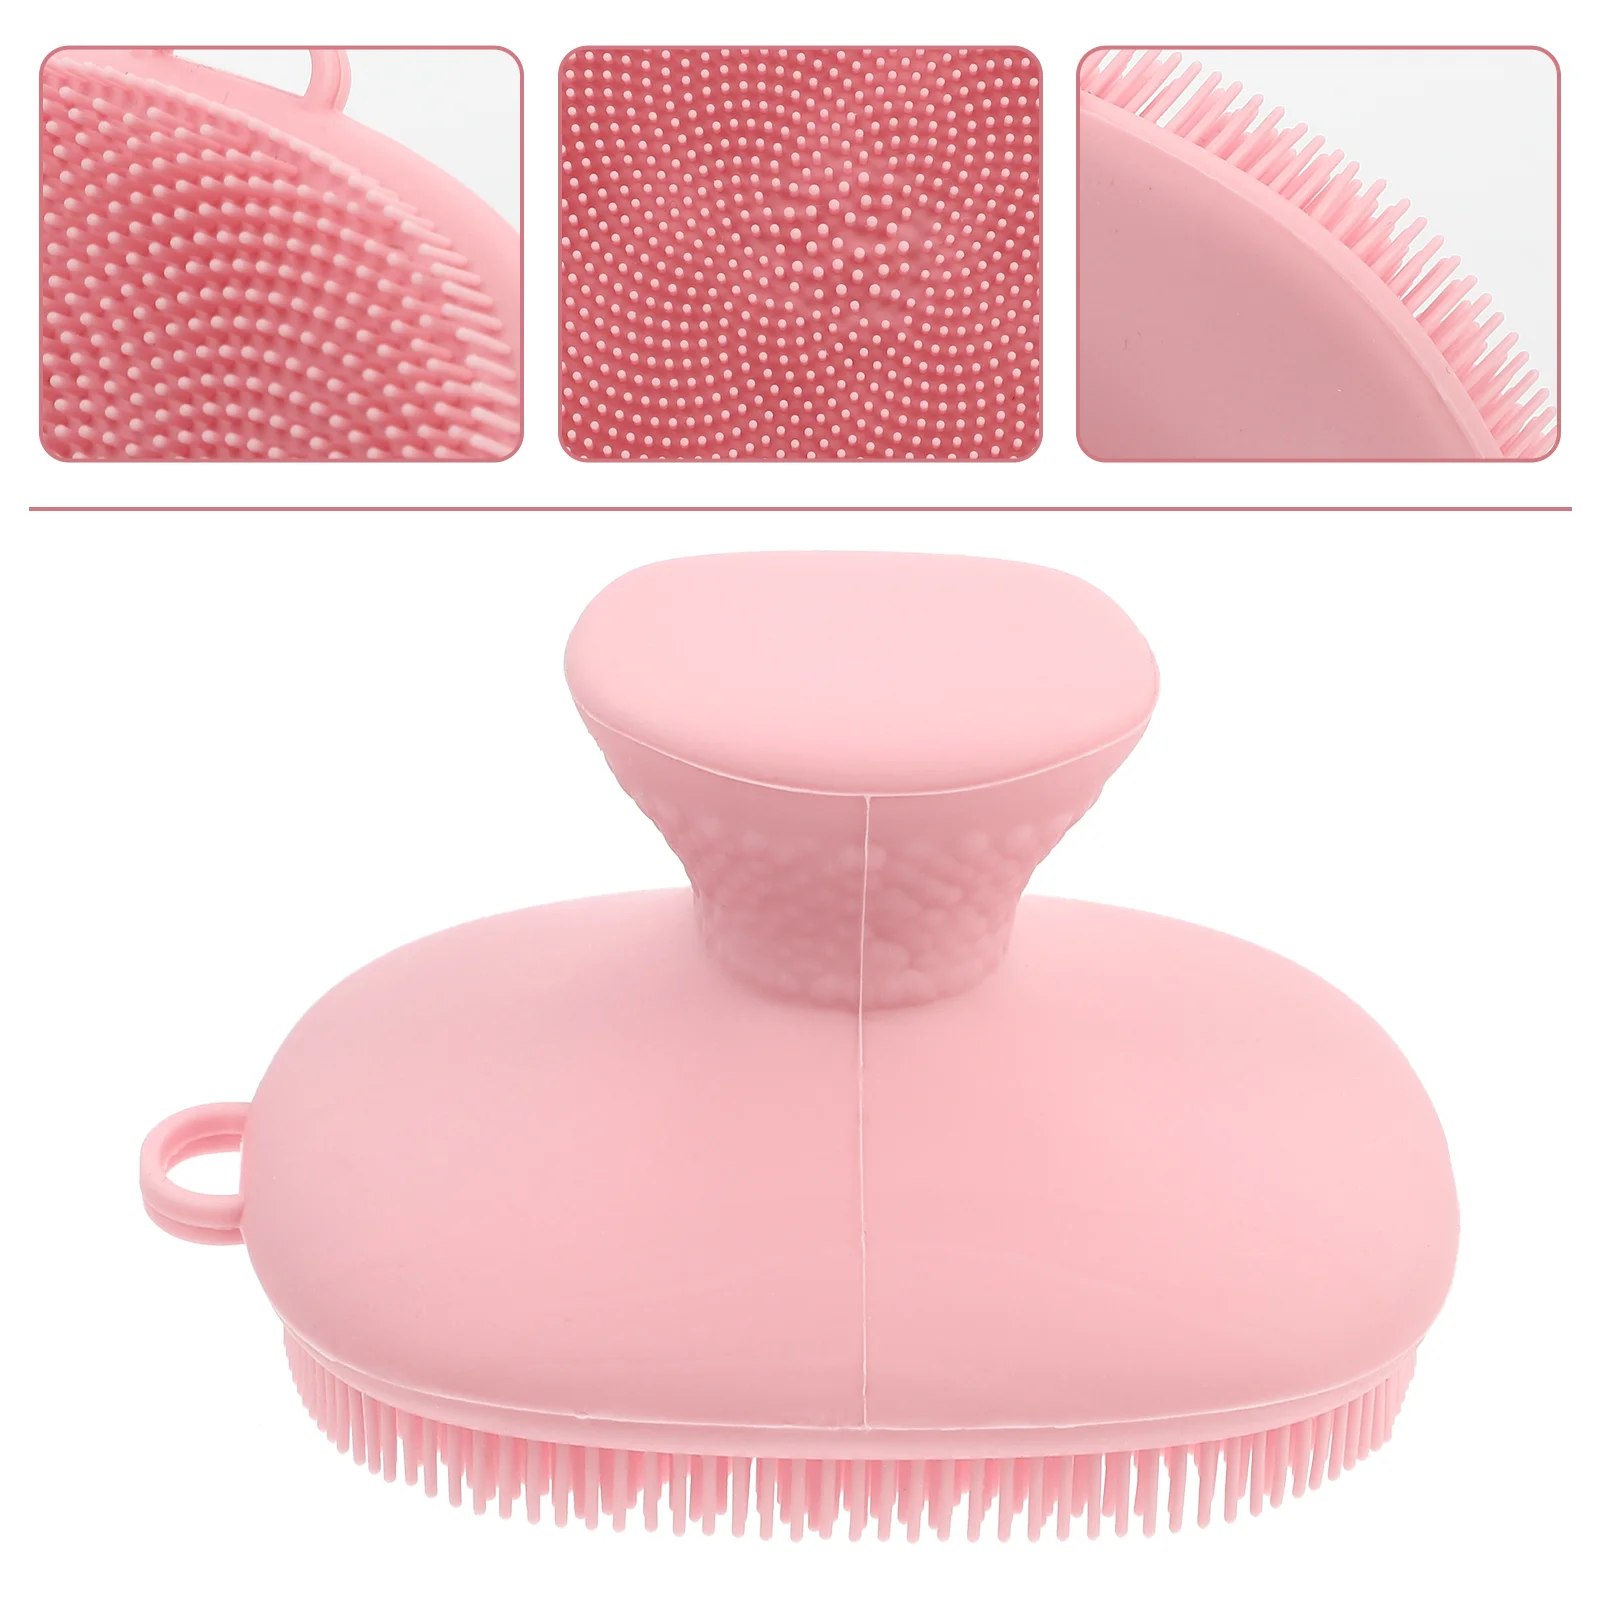 

Brush Face Facial Silicone Cleansing Cleanser Scrubber Cleaner Washing Scrub Wash Loofah Remover Skin Silicon Exfoliating Soft